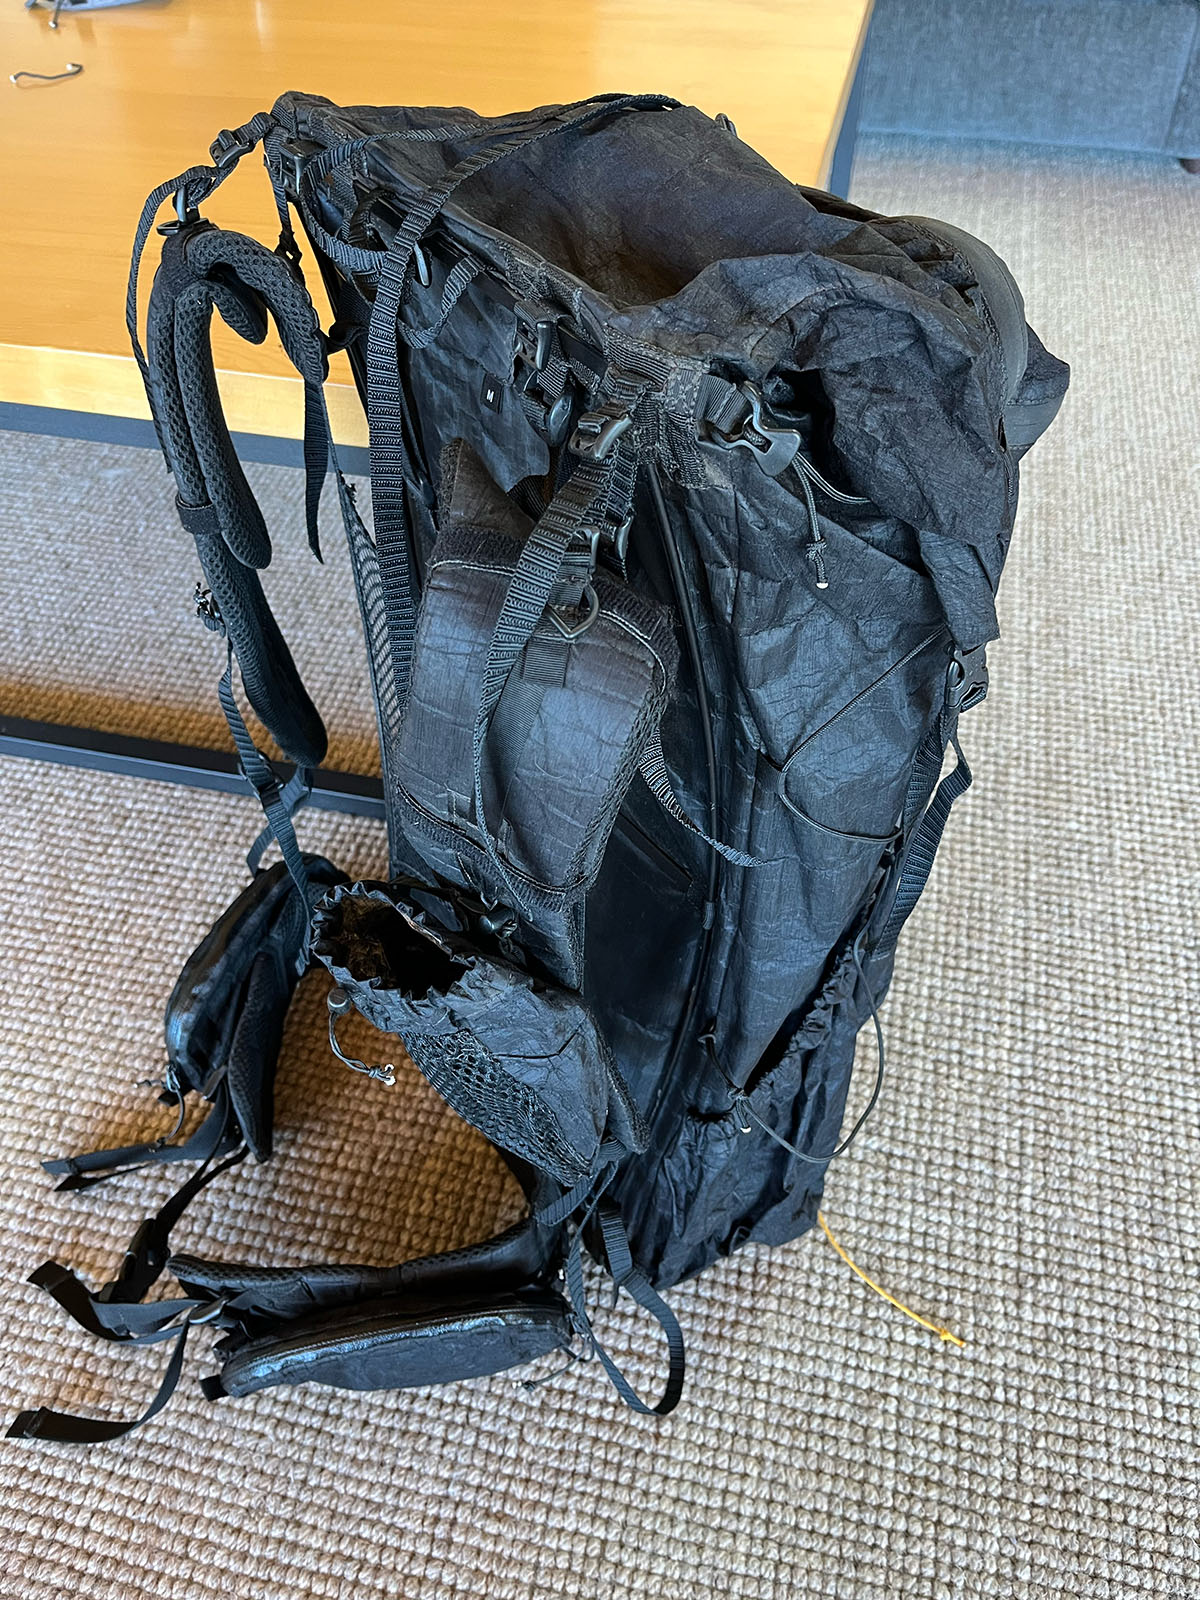 Zpacks Arc Zip 57L Backpack (Dyneema) with extras - Backpacking Light